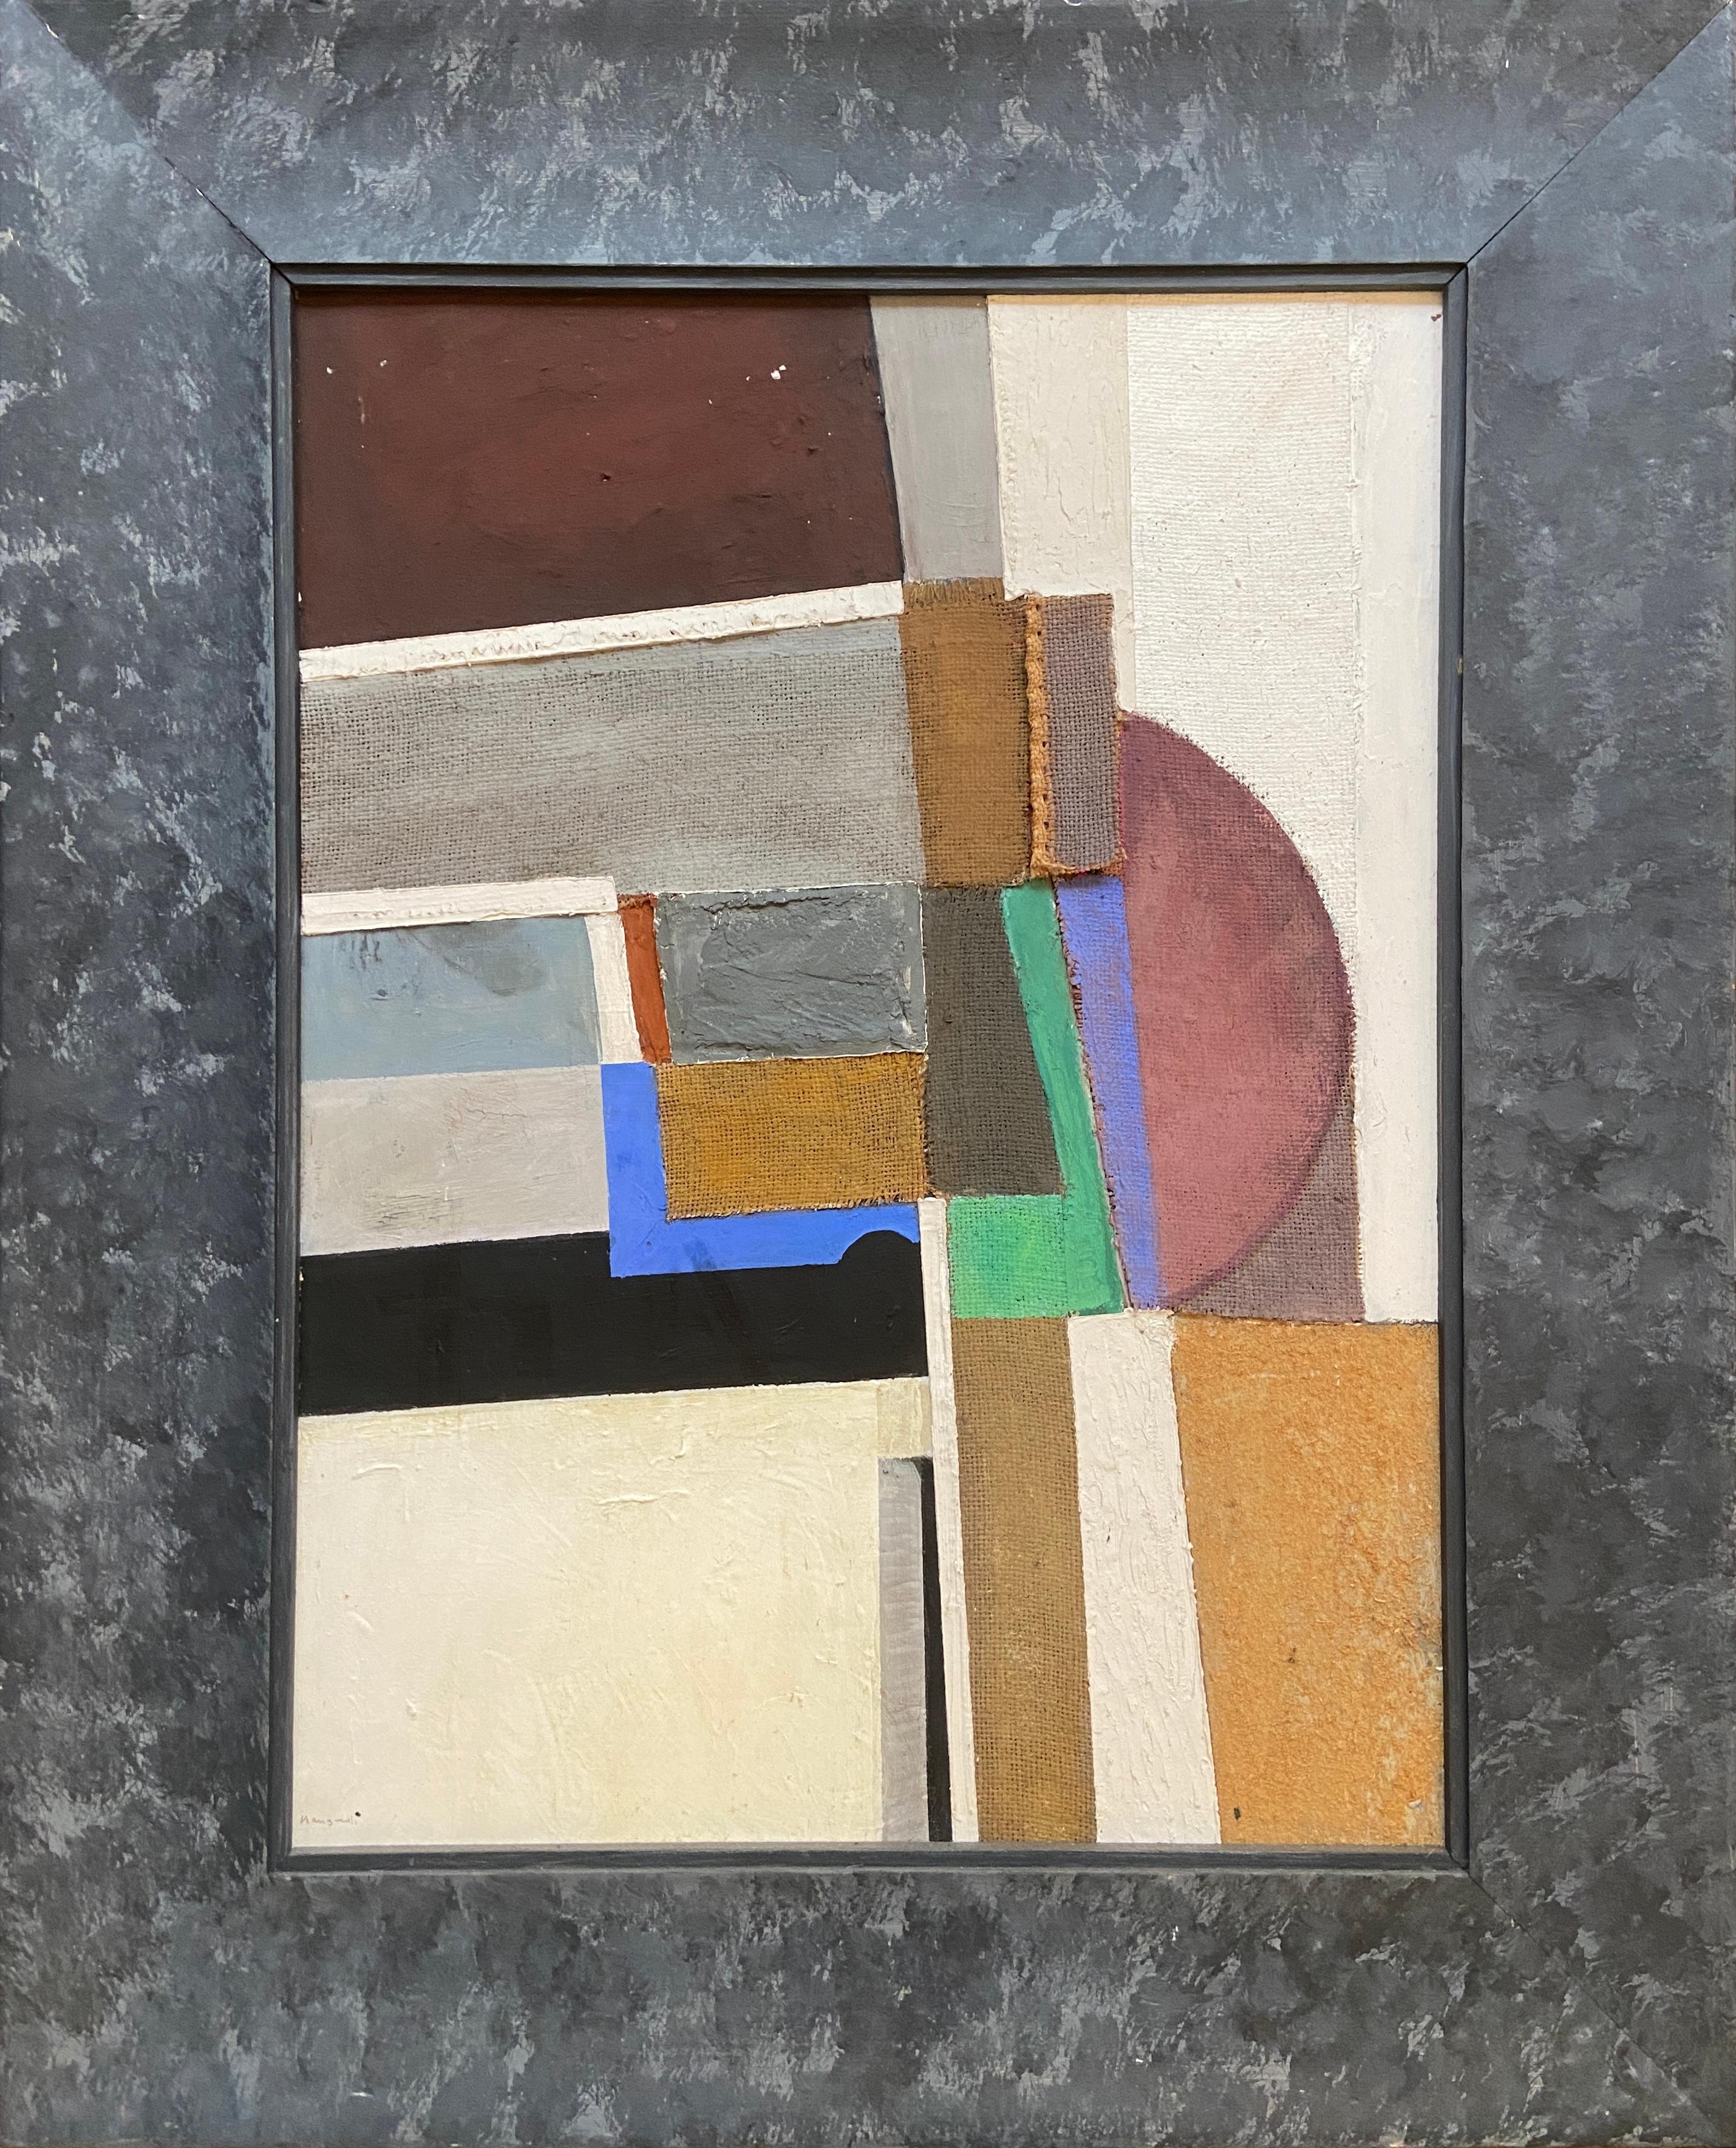 Mixed media collage
Image size: 26 1/2 x 19 1/2 inches (67 x 49.5 cm)
Original frame

A very fine cubist collage original by the well listed British born artist, Peter Manzaroli (b.1938). Born in Ealing, London of an Italian father and Scottish